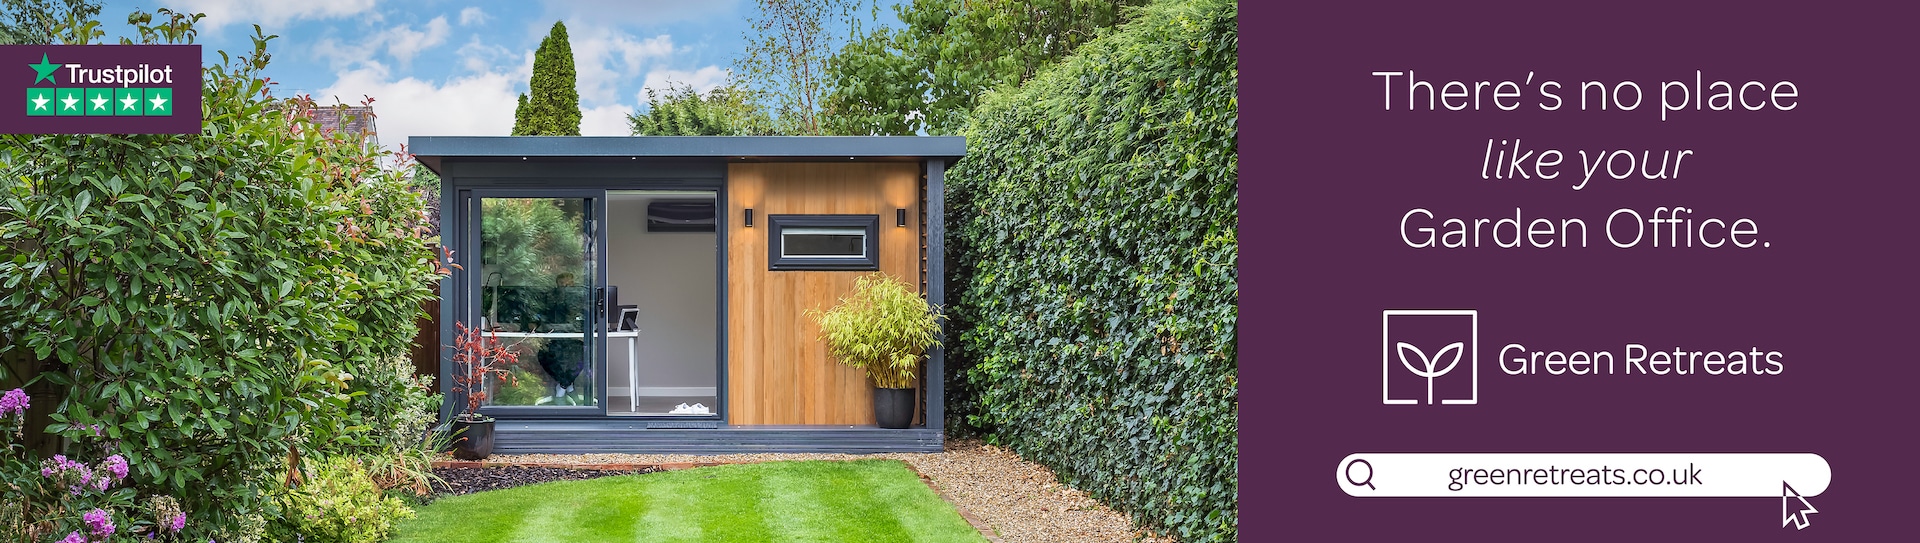 Garden Office Motorway Ad - There's no place like your garden office